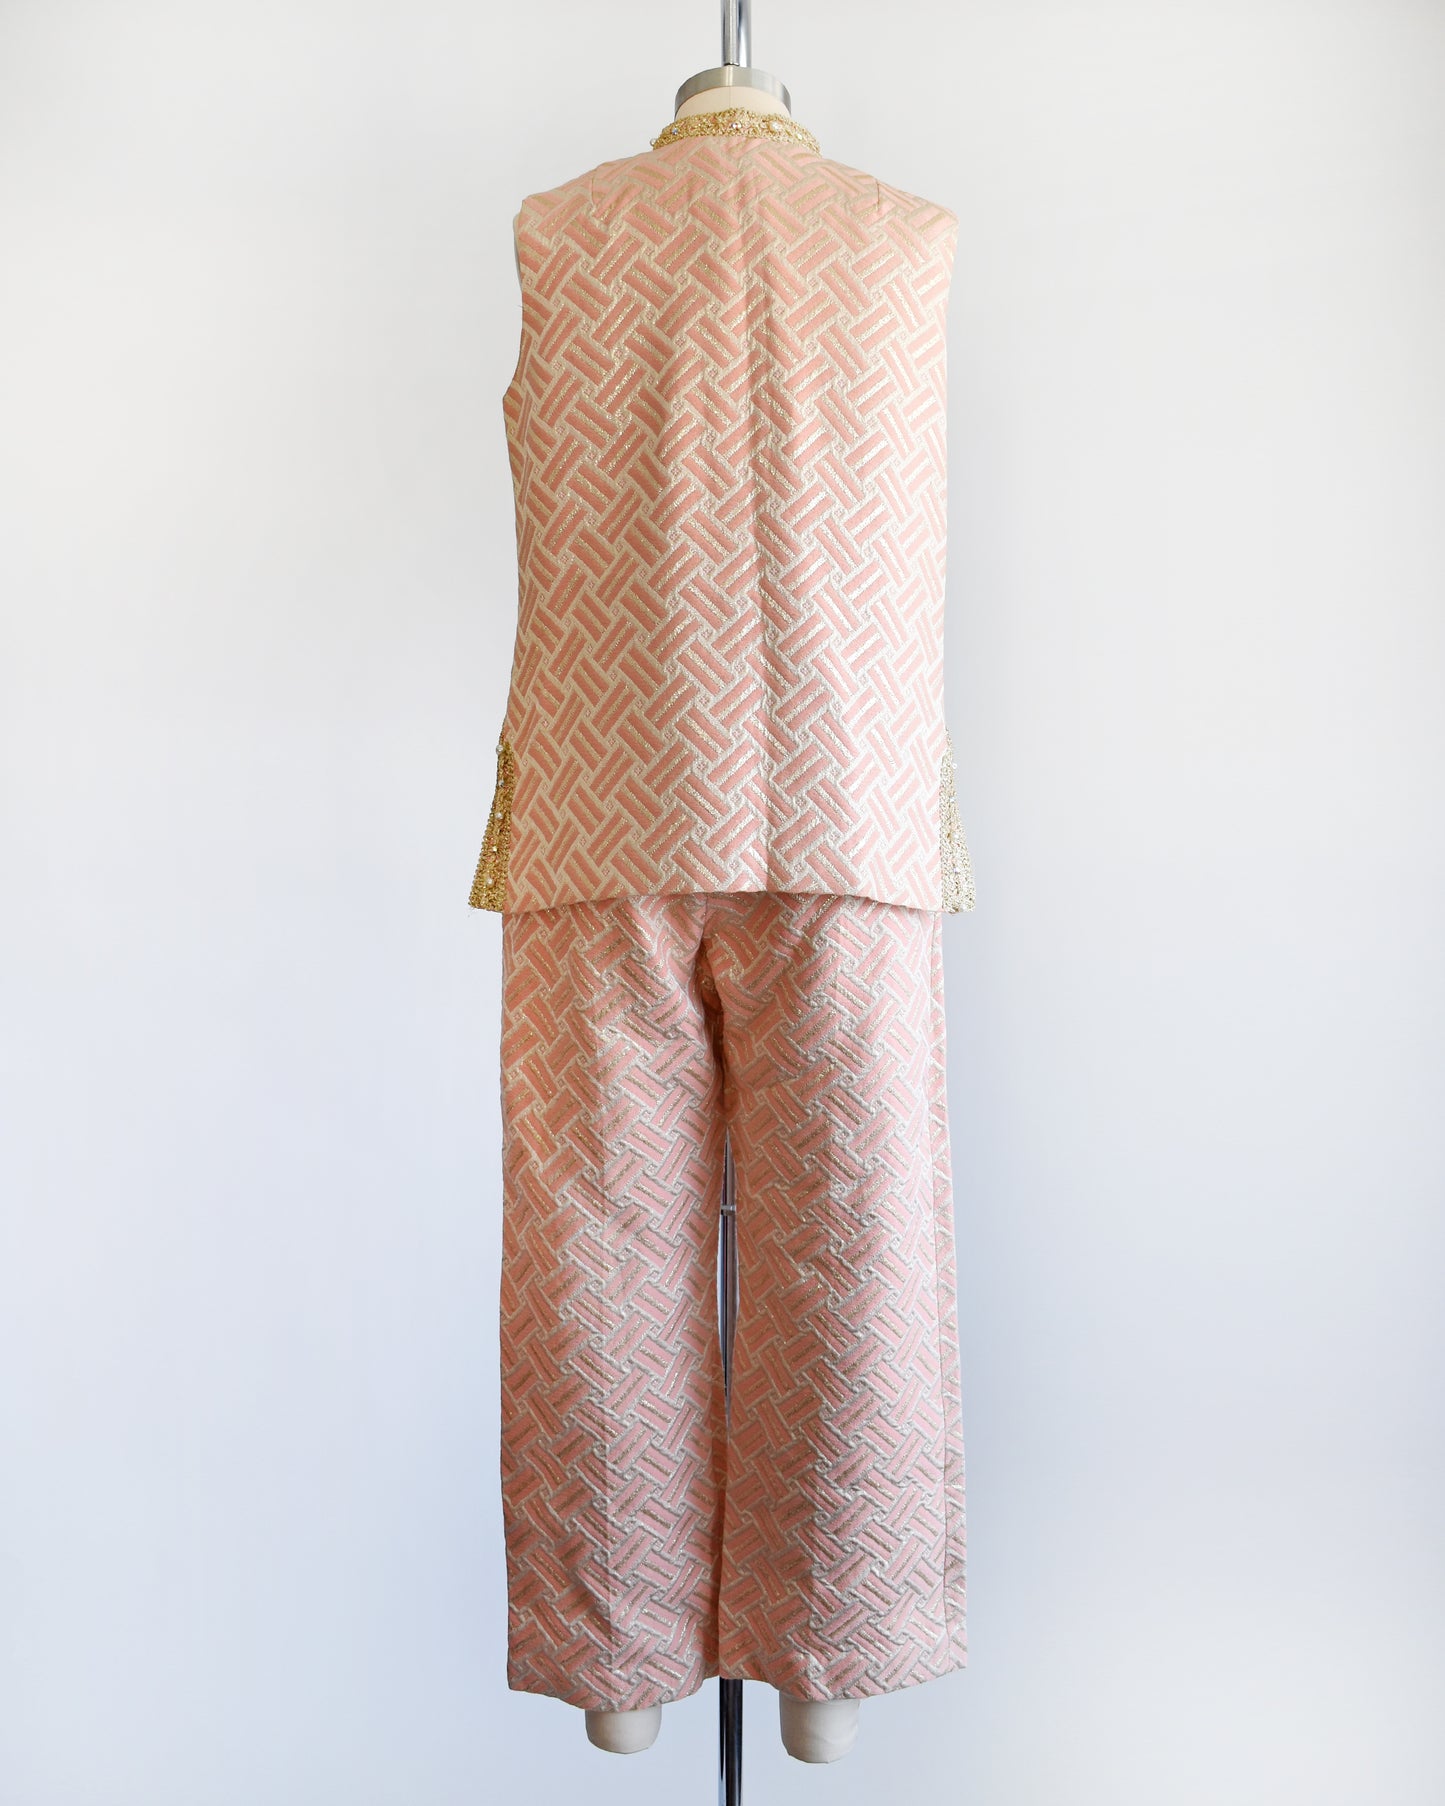 Back view of a vintage 1960s pink and gold mod pant set with a metallic gold collar with rhinestone trim. The set includes a matching top and bottoms.